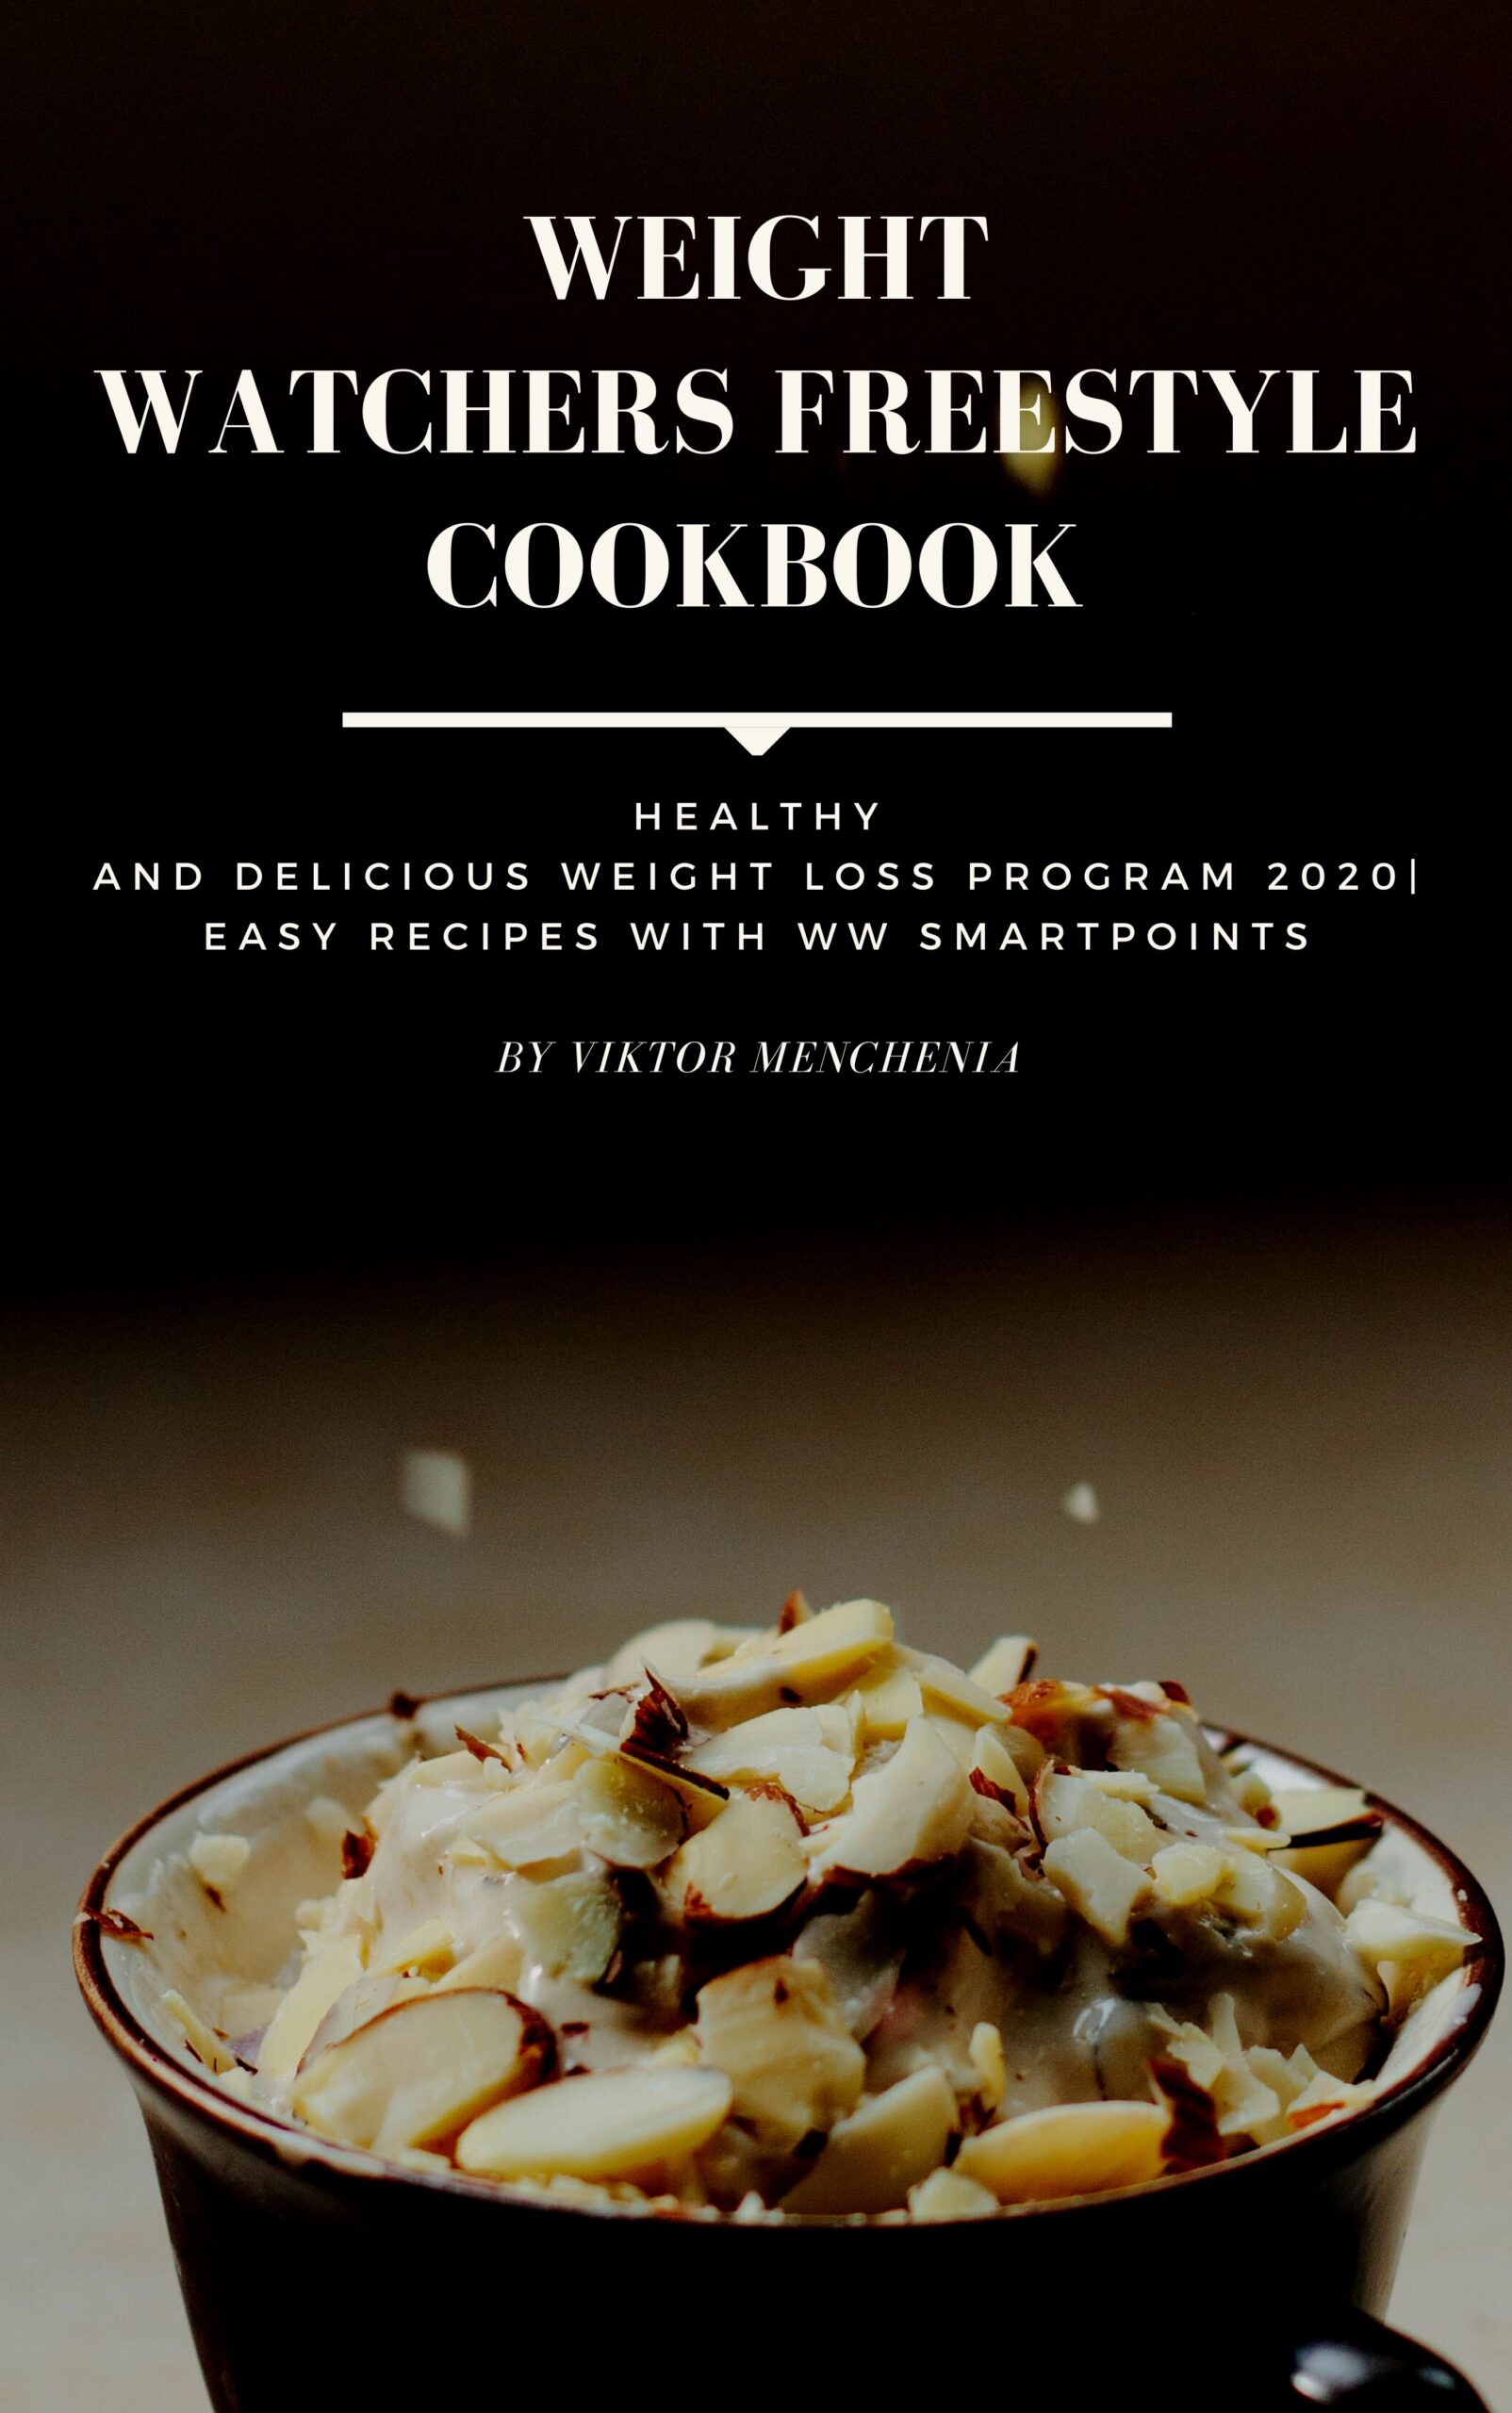 FREE: Weight Watchers Freestyle Cookbook by Viktor Menchenia